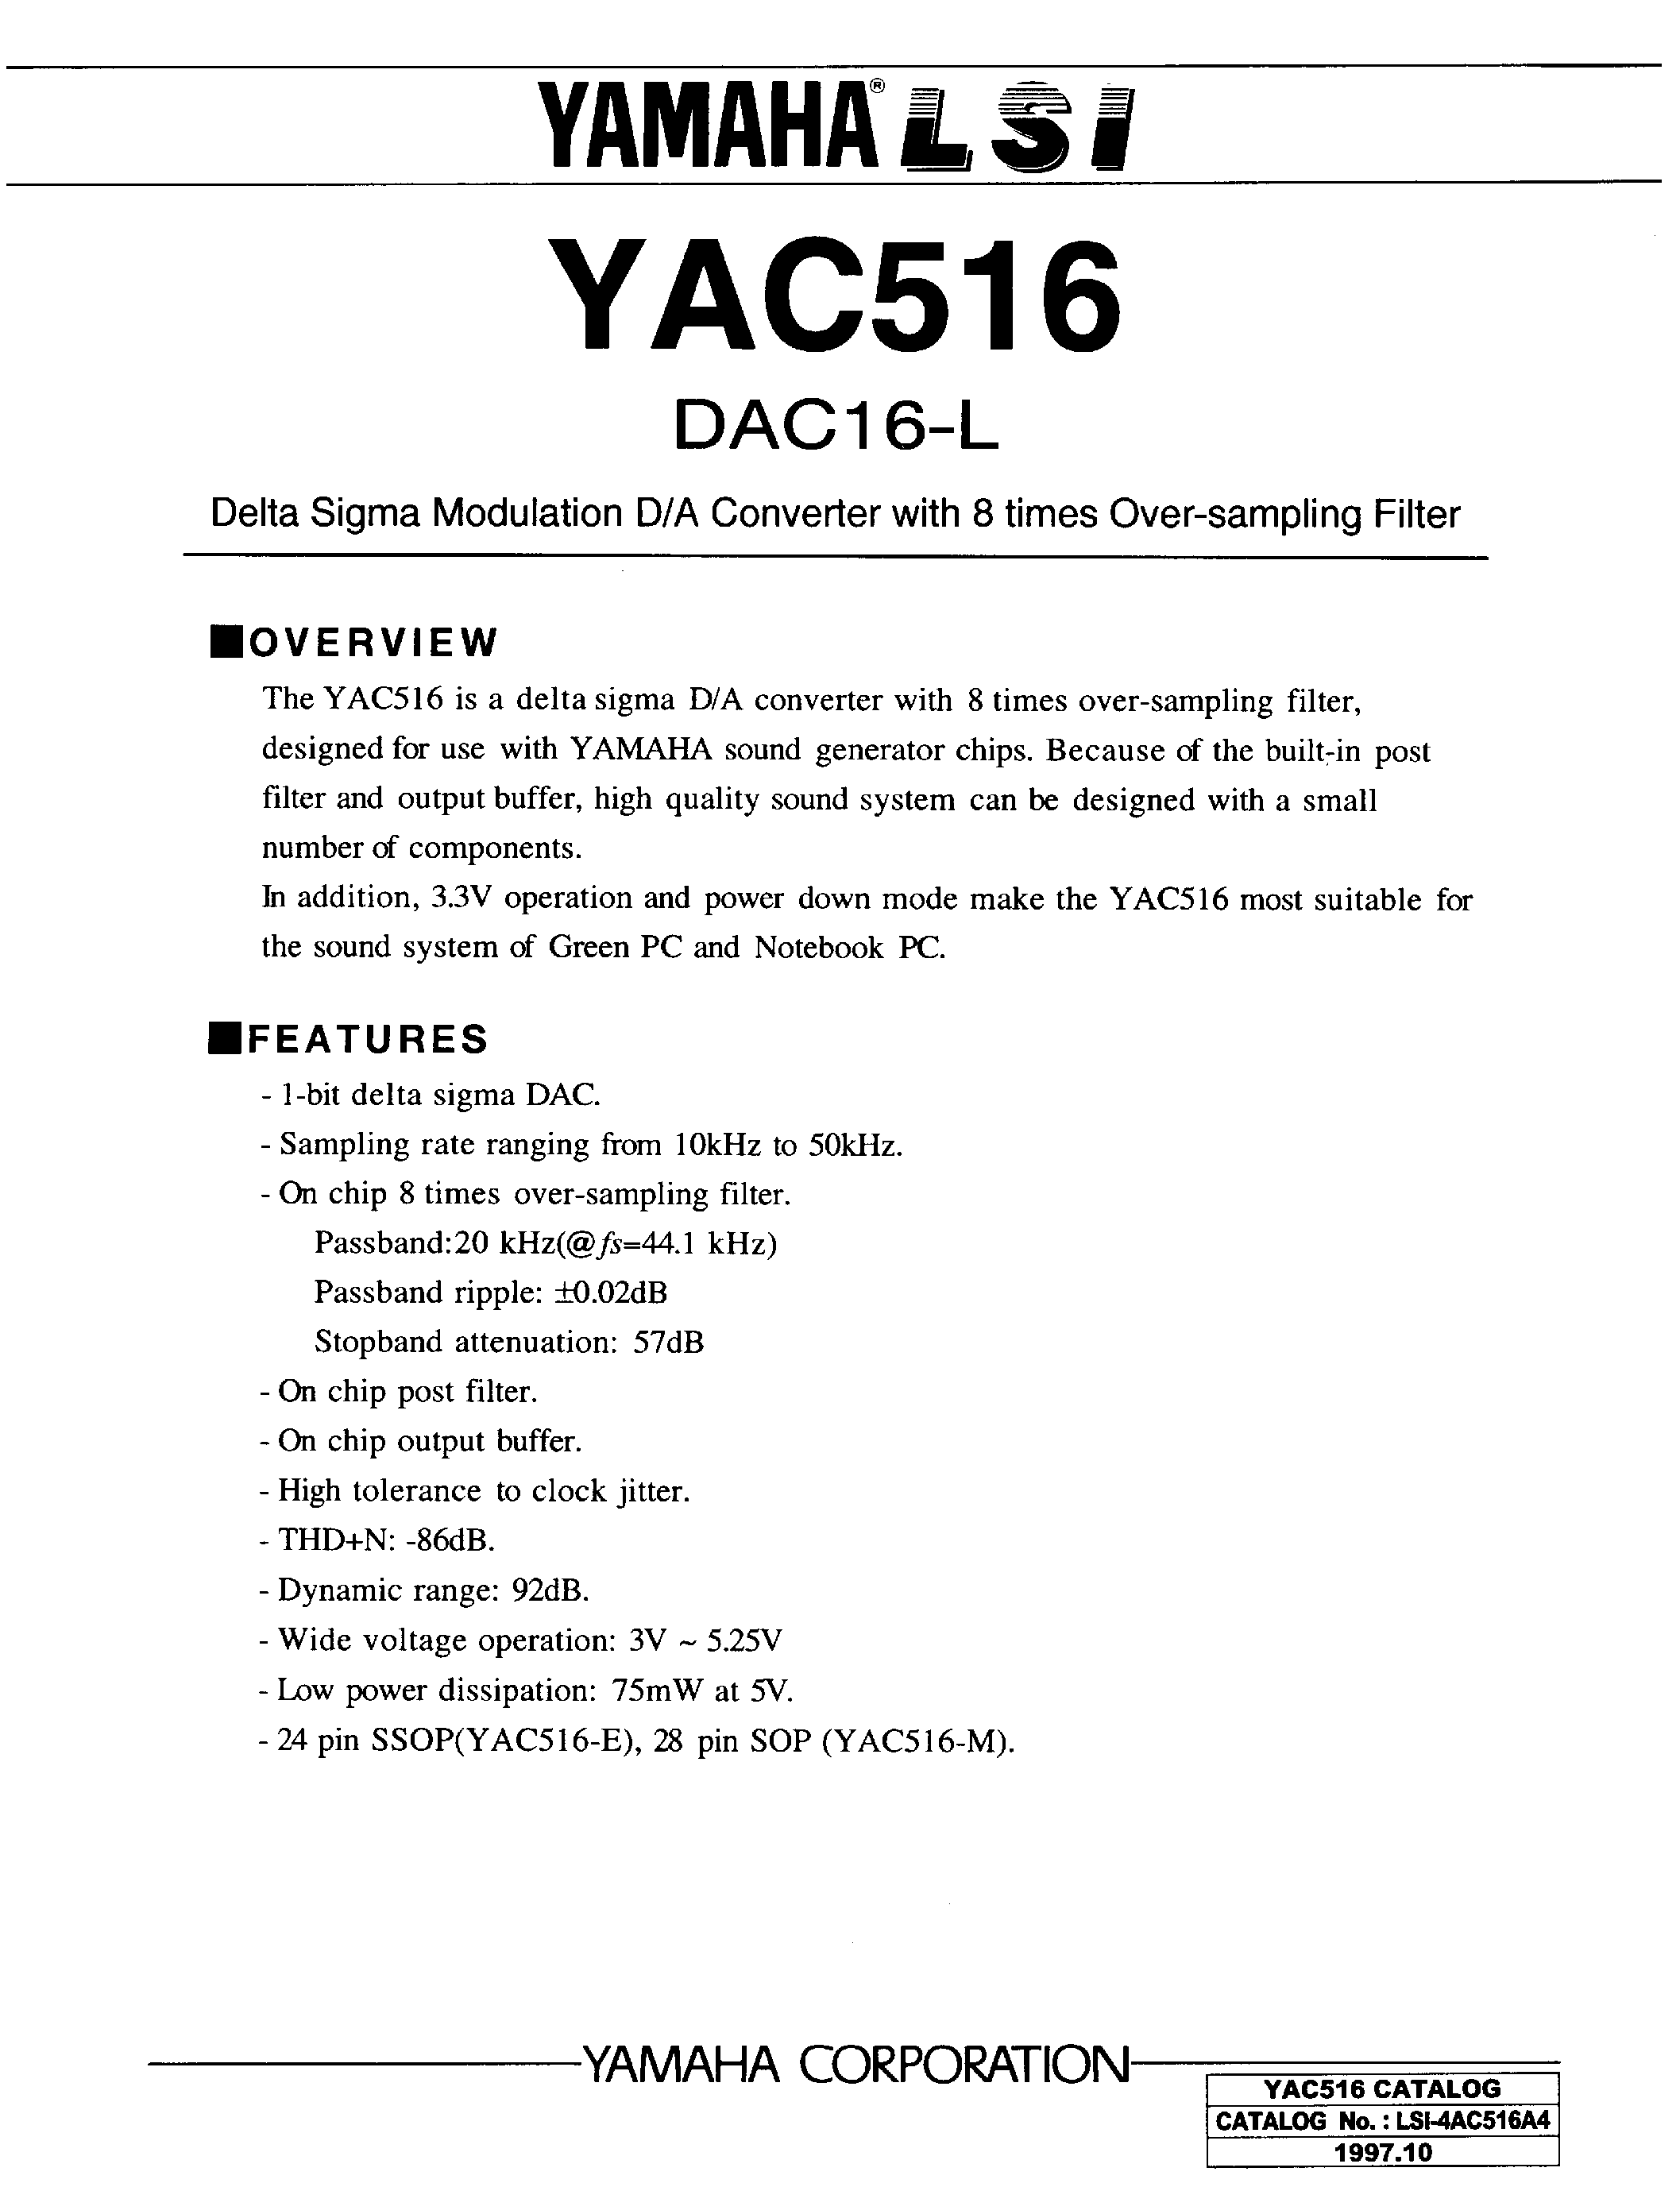 Datasheet YAC516 - DELTA SIGMA MODULATION D/A CONVERTER WITH 8 TIMES OVER SAMPLING FILTER page 1